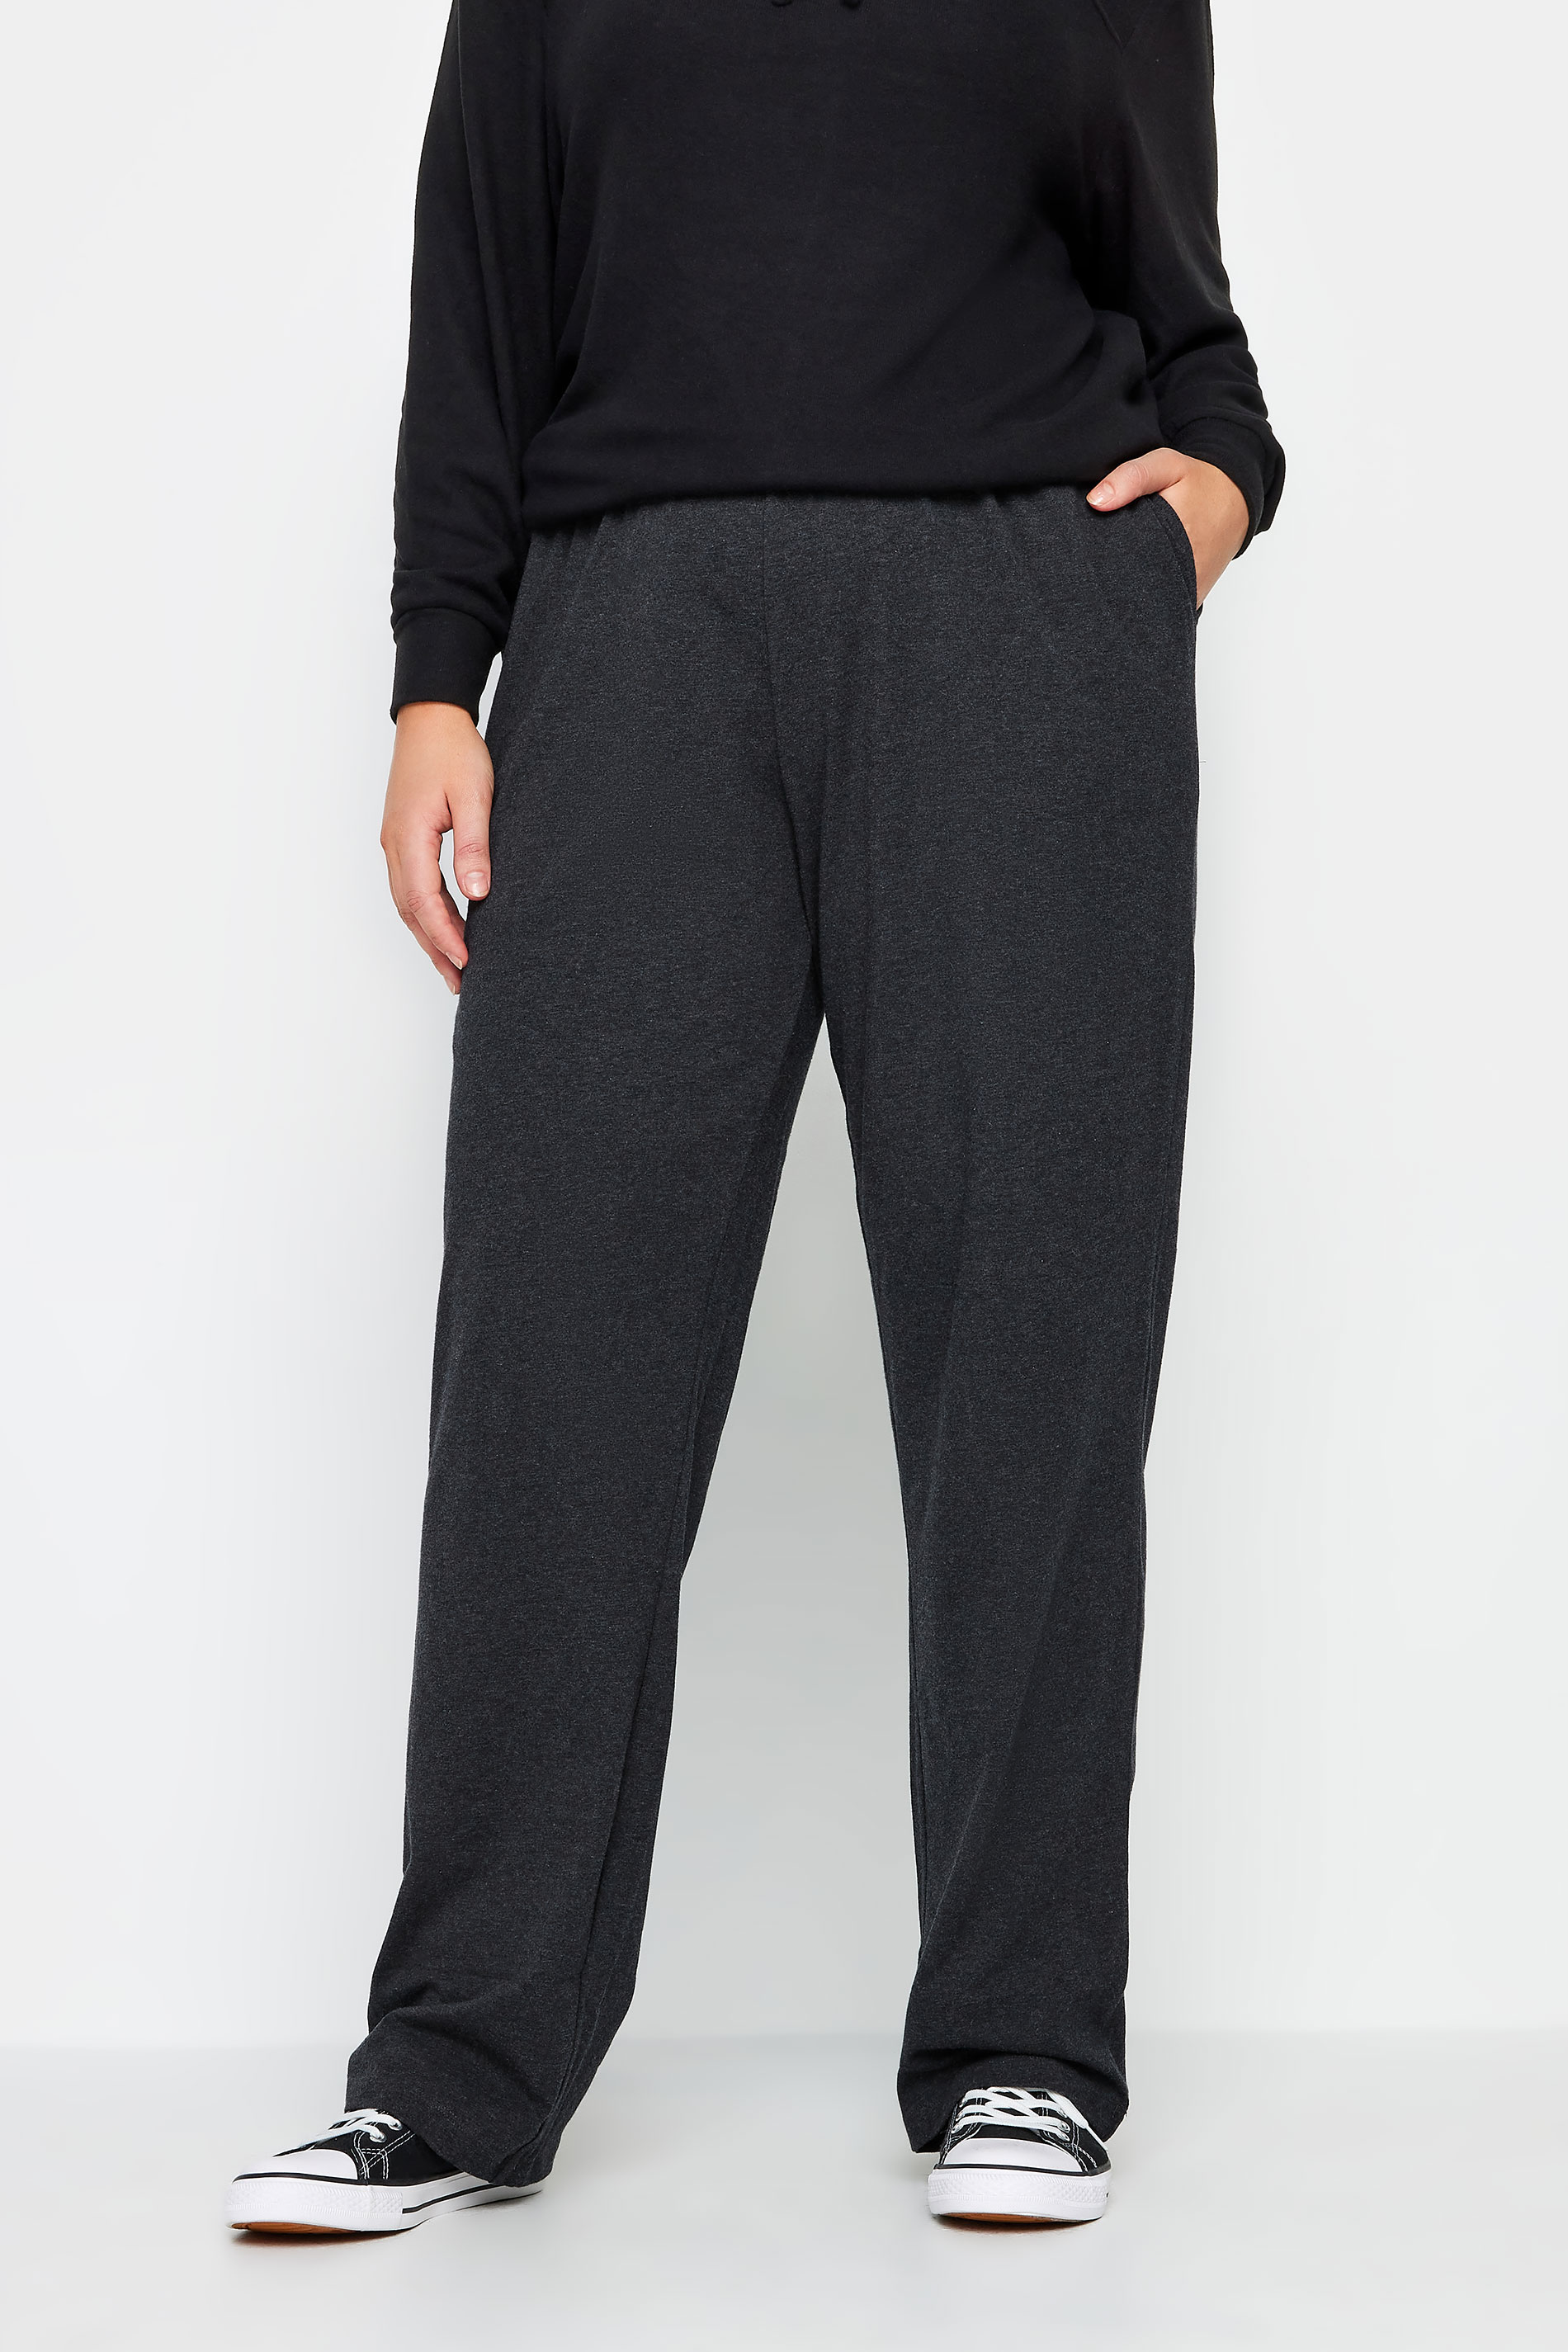 Evans Charcoal Grey Stretch Tall Joggers 1